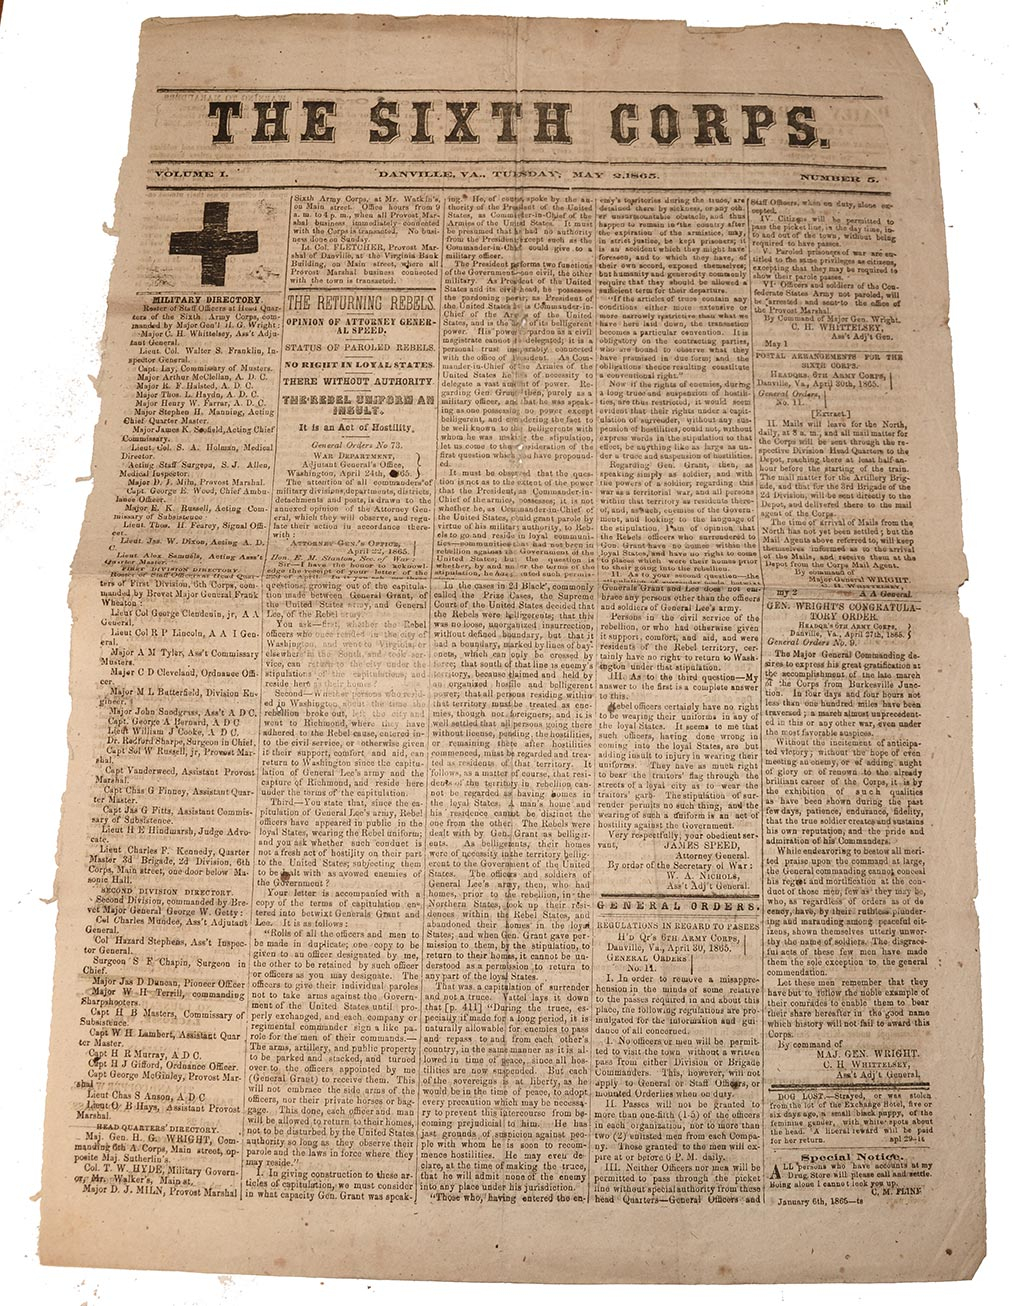 THE SIXTH CORPS NEWSPAPER – MAY 2, 1865